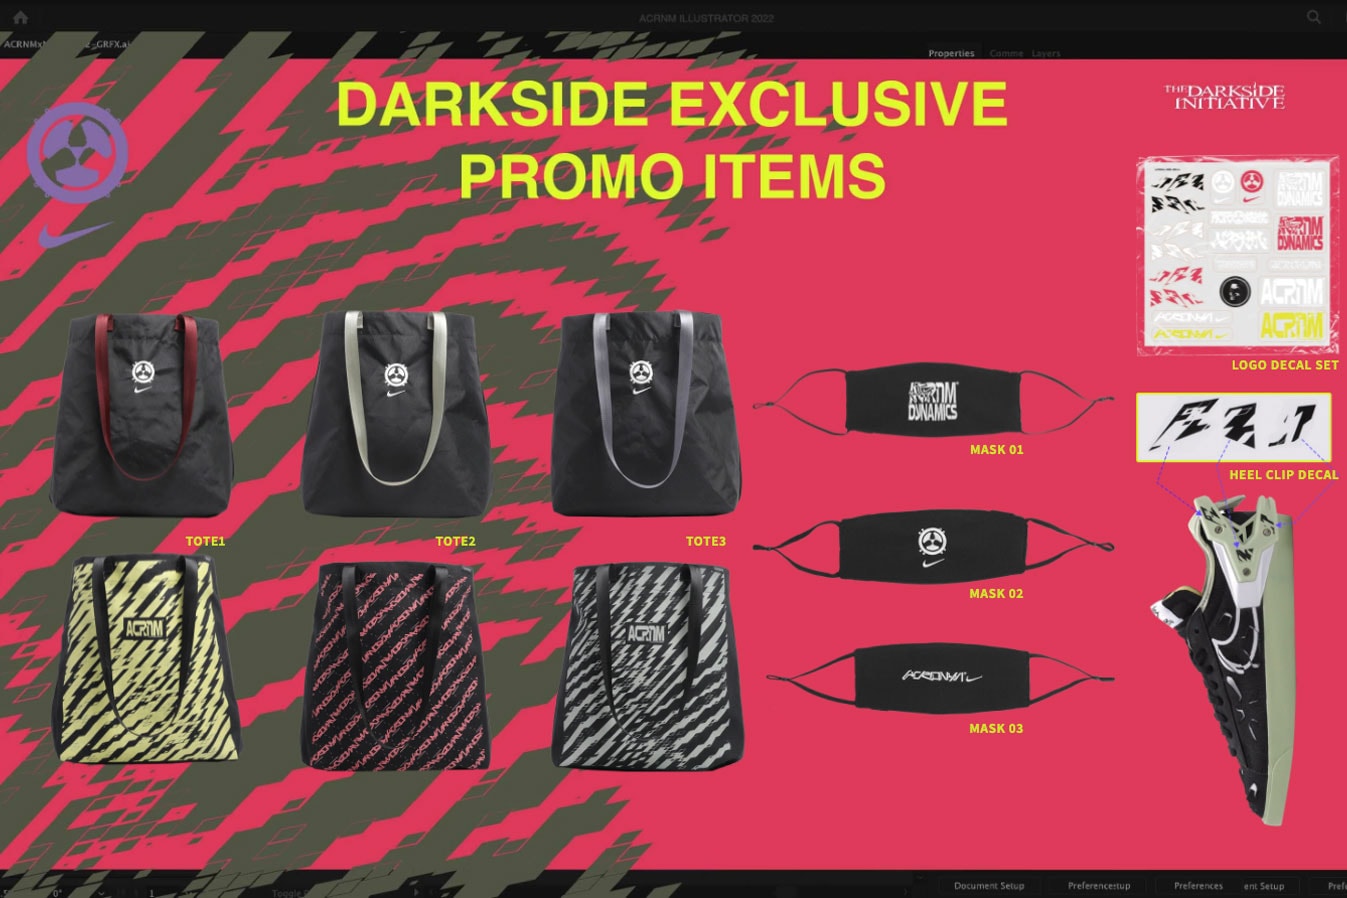 The Darkside Initiative Exclusive Nike ACRONYM Accessories facemask carrying options totes decals microsite fencing promo video news release info